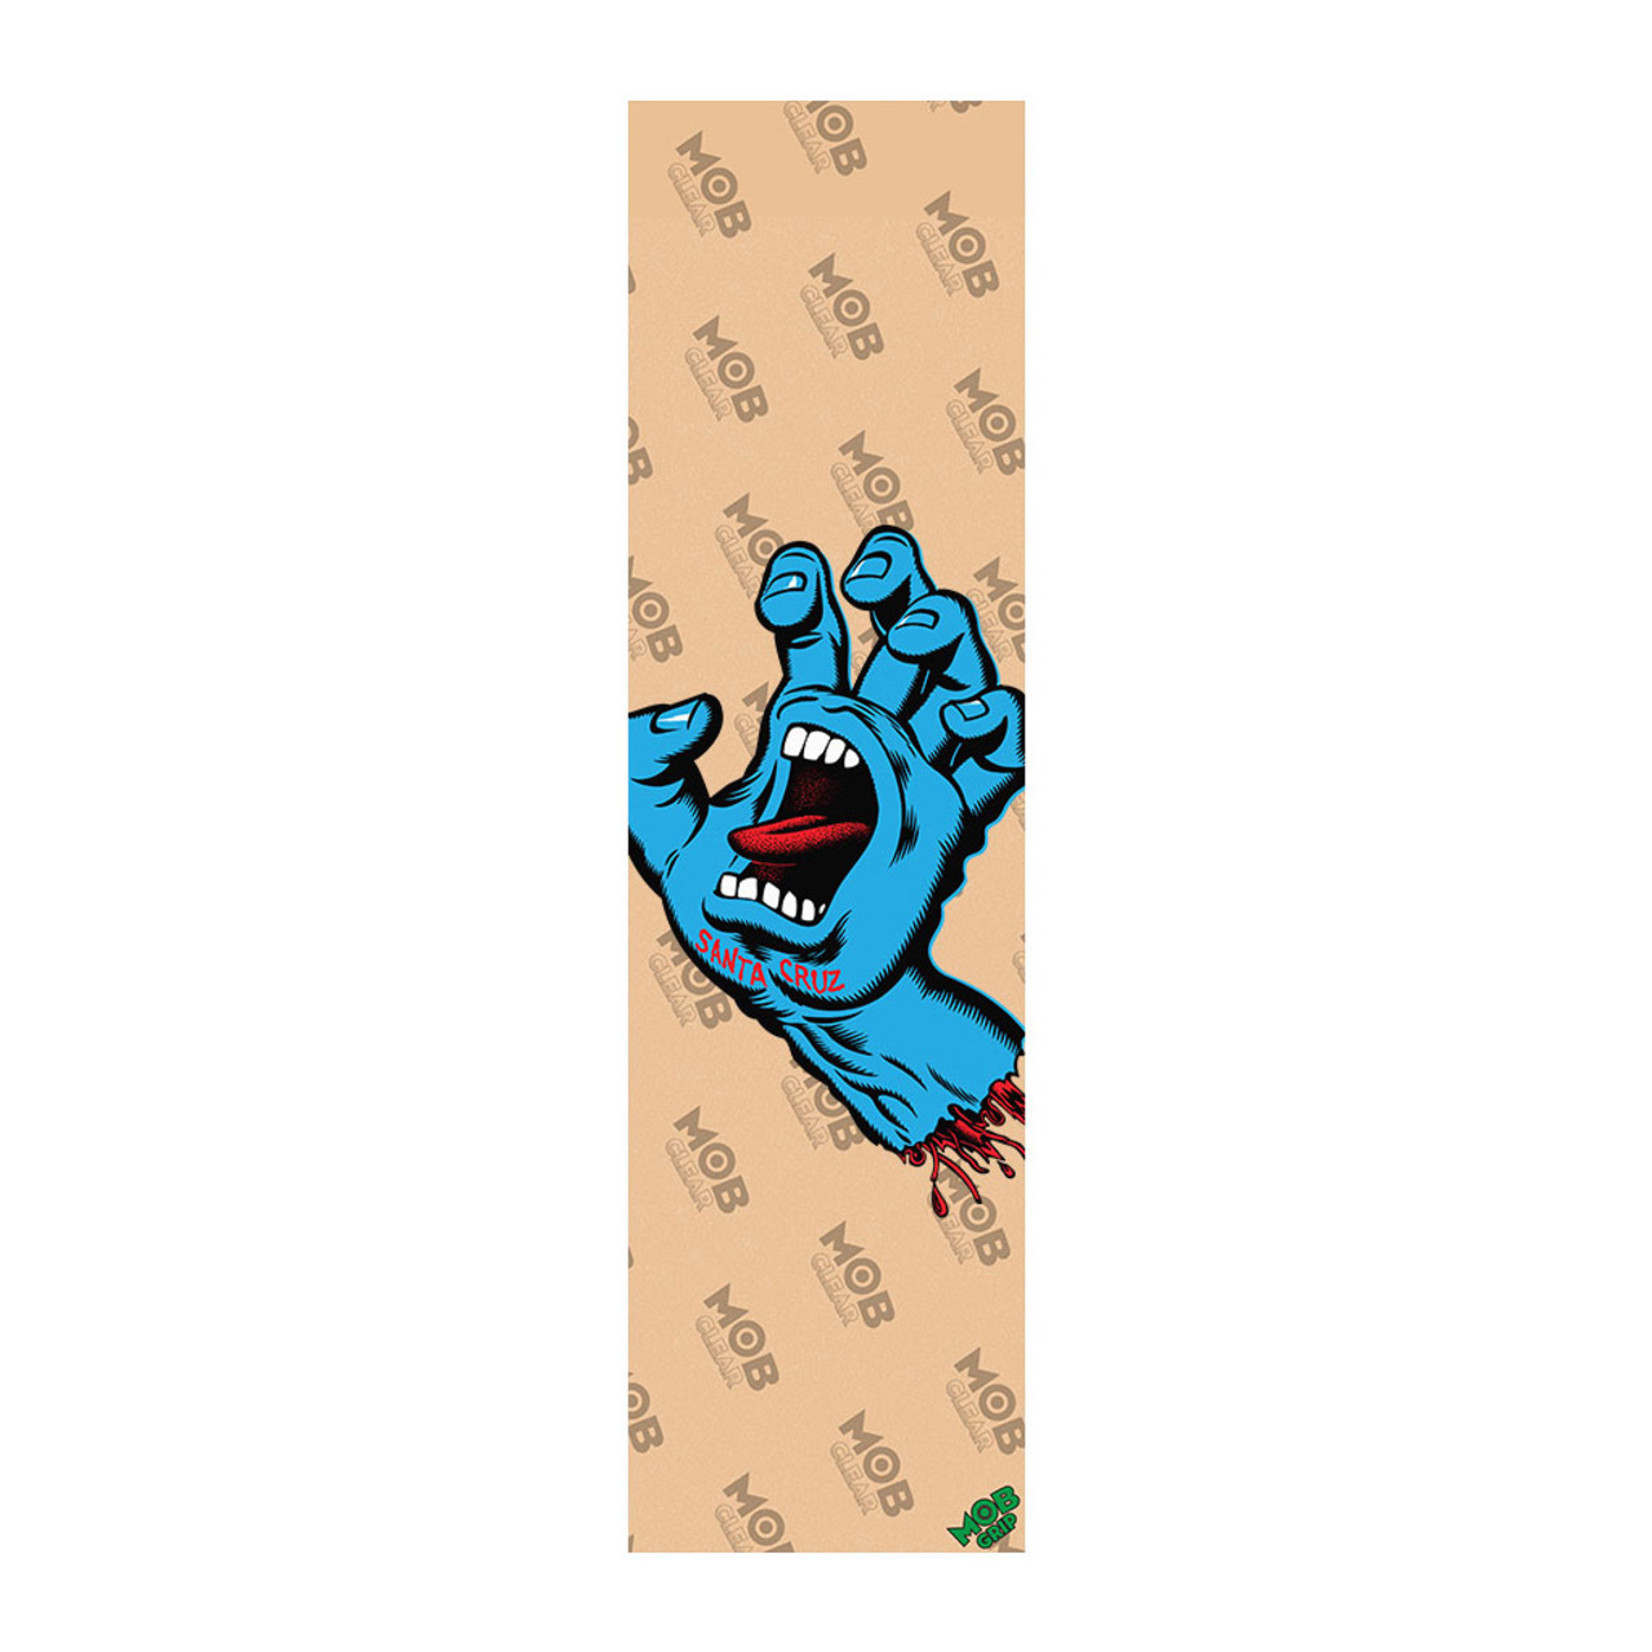 Mob Grip Clear Griptape 10 x 33 CalStreets BoarderLabs